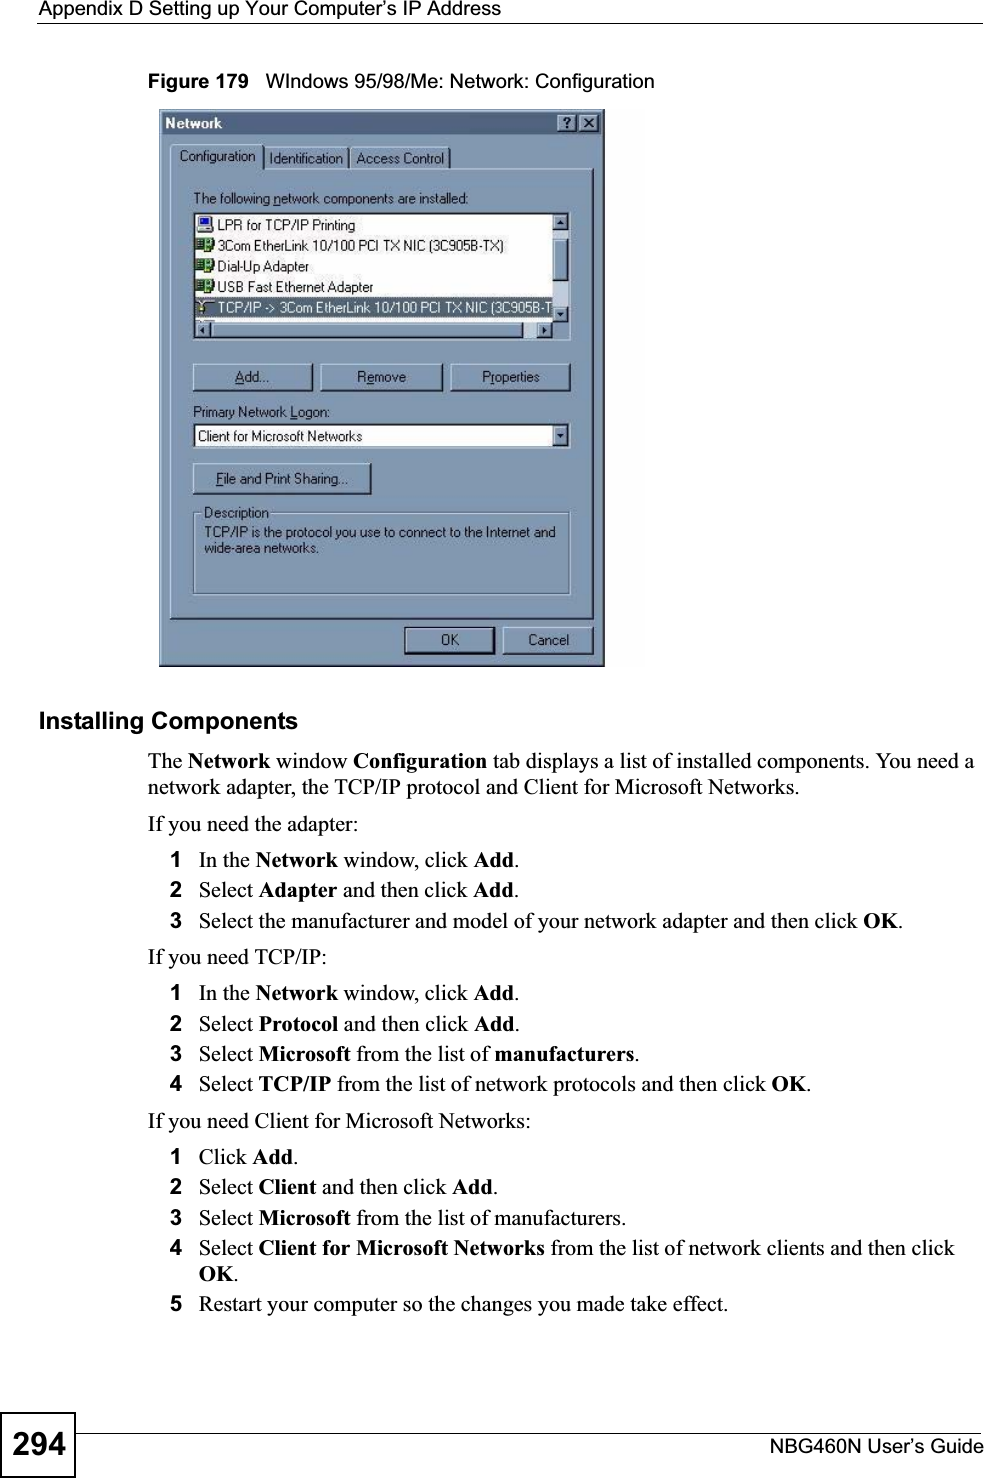 Appendix D Setting up Your Computer’s IP AddressNBG460N User’s Guide294Figure 179   WIndows 95/98/Me: Network: ConfigurationInstalling ComponentsThe Network window Configuration tab displays a list of installed components. You need a network adapter, the TCP/IP protocol and Client for Microsoft Networks.If you need the adapter:1In the Network window, click Add.2Select Adapter and then click Add.3Select the manufacturer and model of your network adapter and then click OK.If you need TCP/IP:1In the Network window, click Add.2Select Protocol and then click Add.3Select Microsoft from the list of manufacturers.4Select TCP/IP from the list of network protocols and then click OK.If you need Client for Microsoft Networks:1Click Add.2Select Client and then click Add.3Select Microsoft from the list of manufacturers.4Select Client for Microsoft Networks from the list of network clients and then click OK.5Restart your computer so the changes you made take effect.